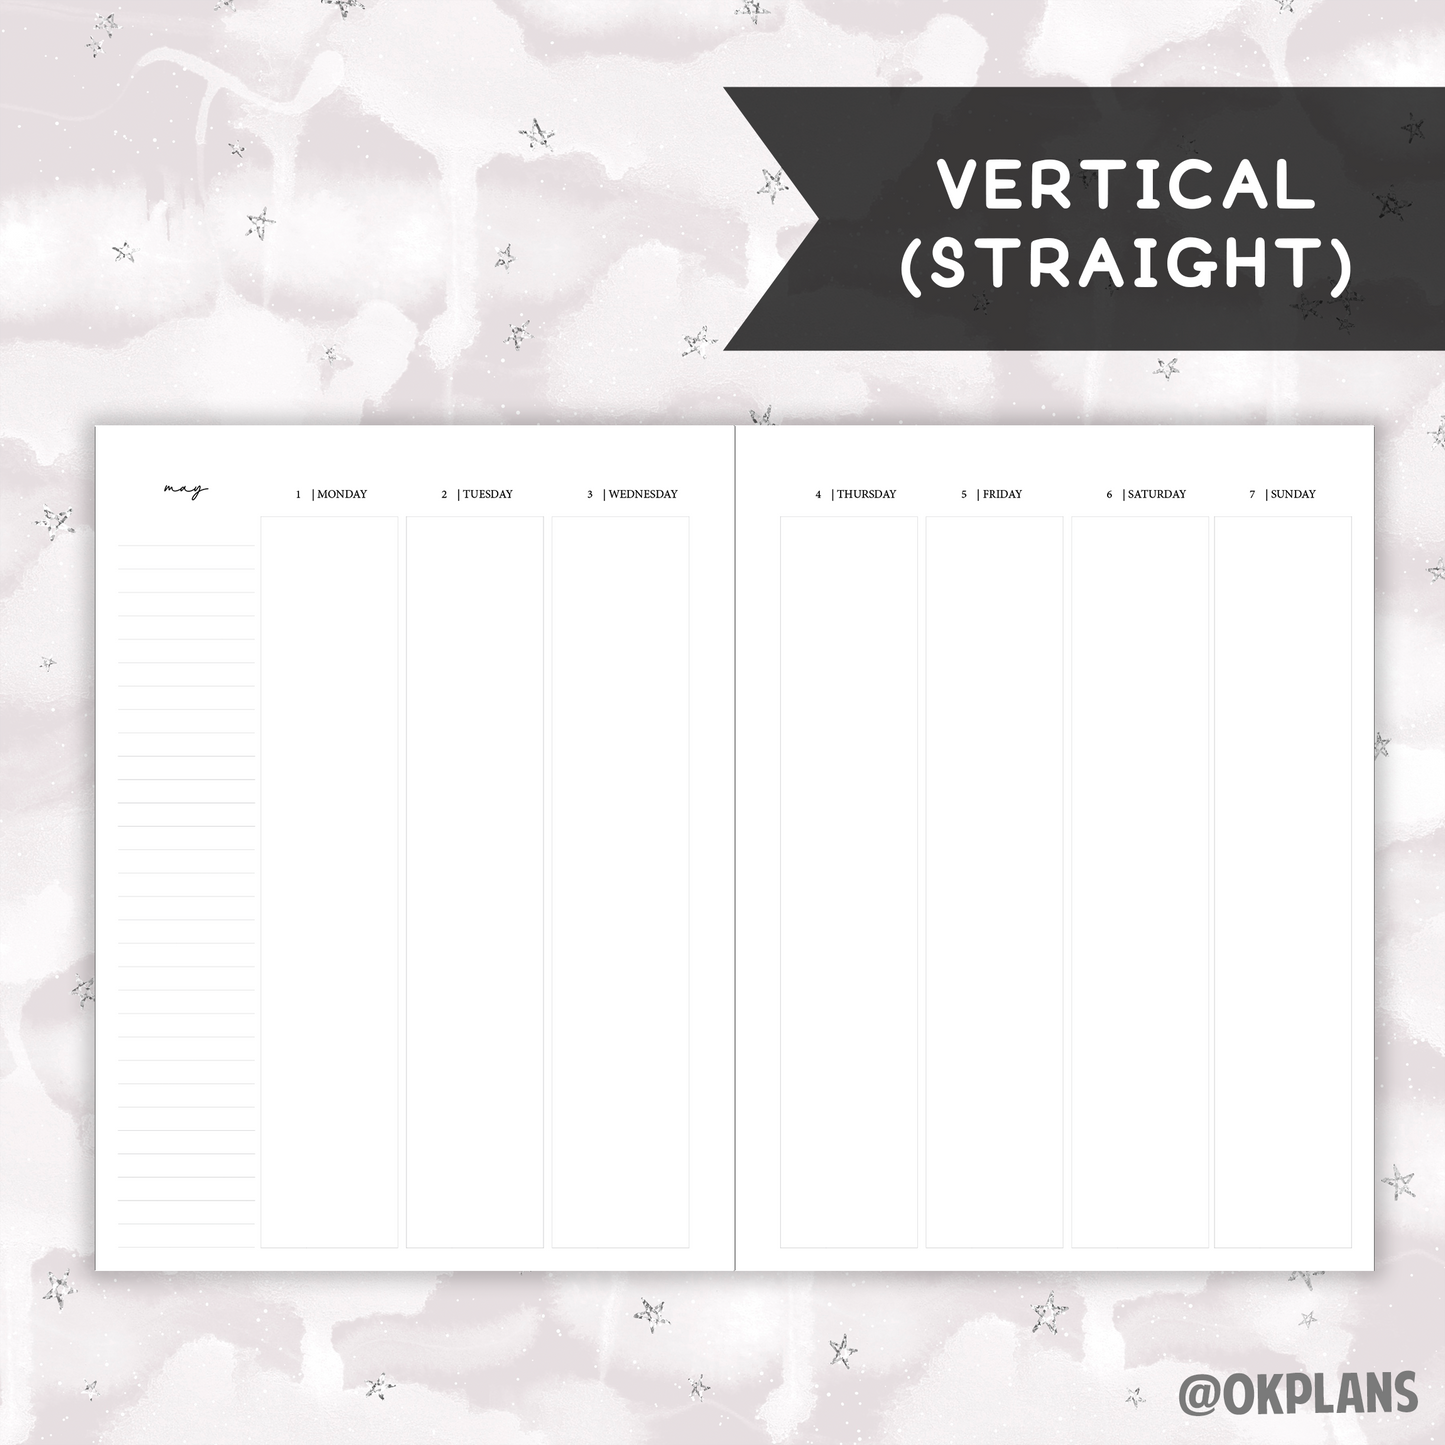 *DATED* Classic Weekly Planner - Pick Weekly and Binding Option